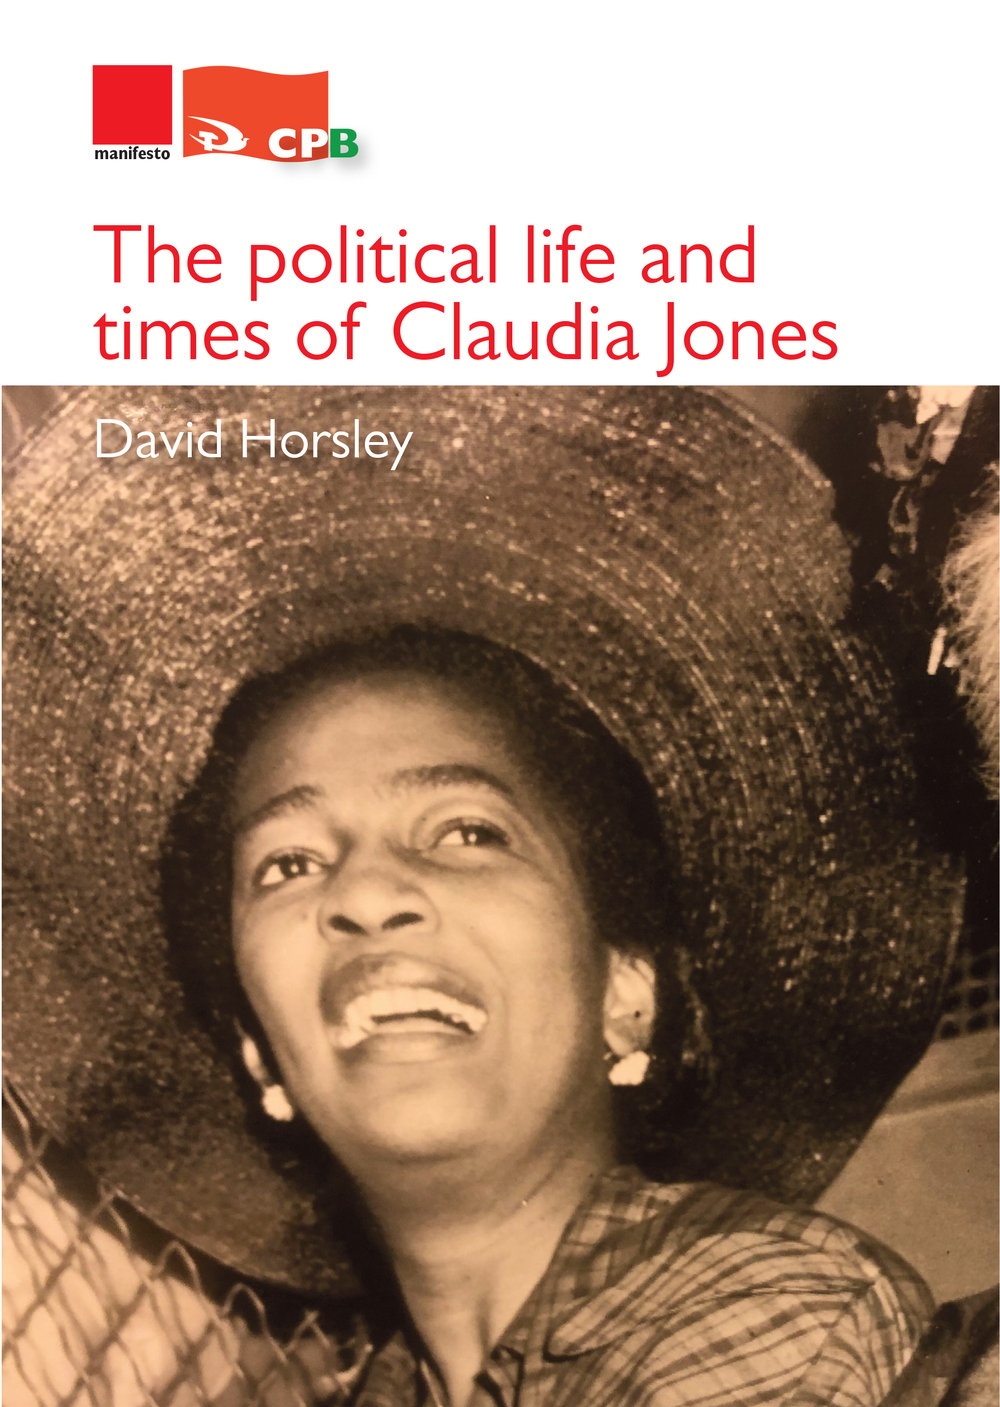 The political life and times of Claudia Jones